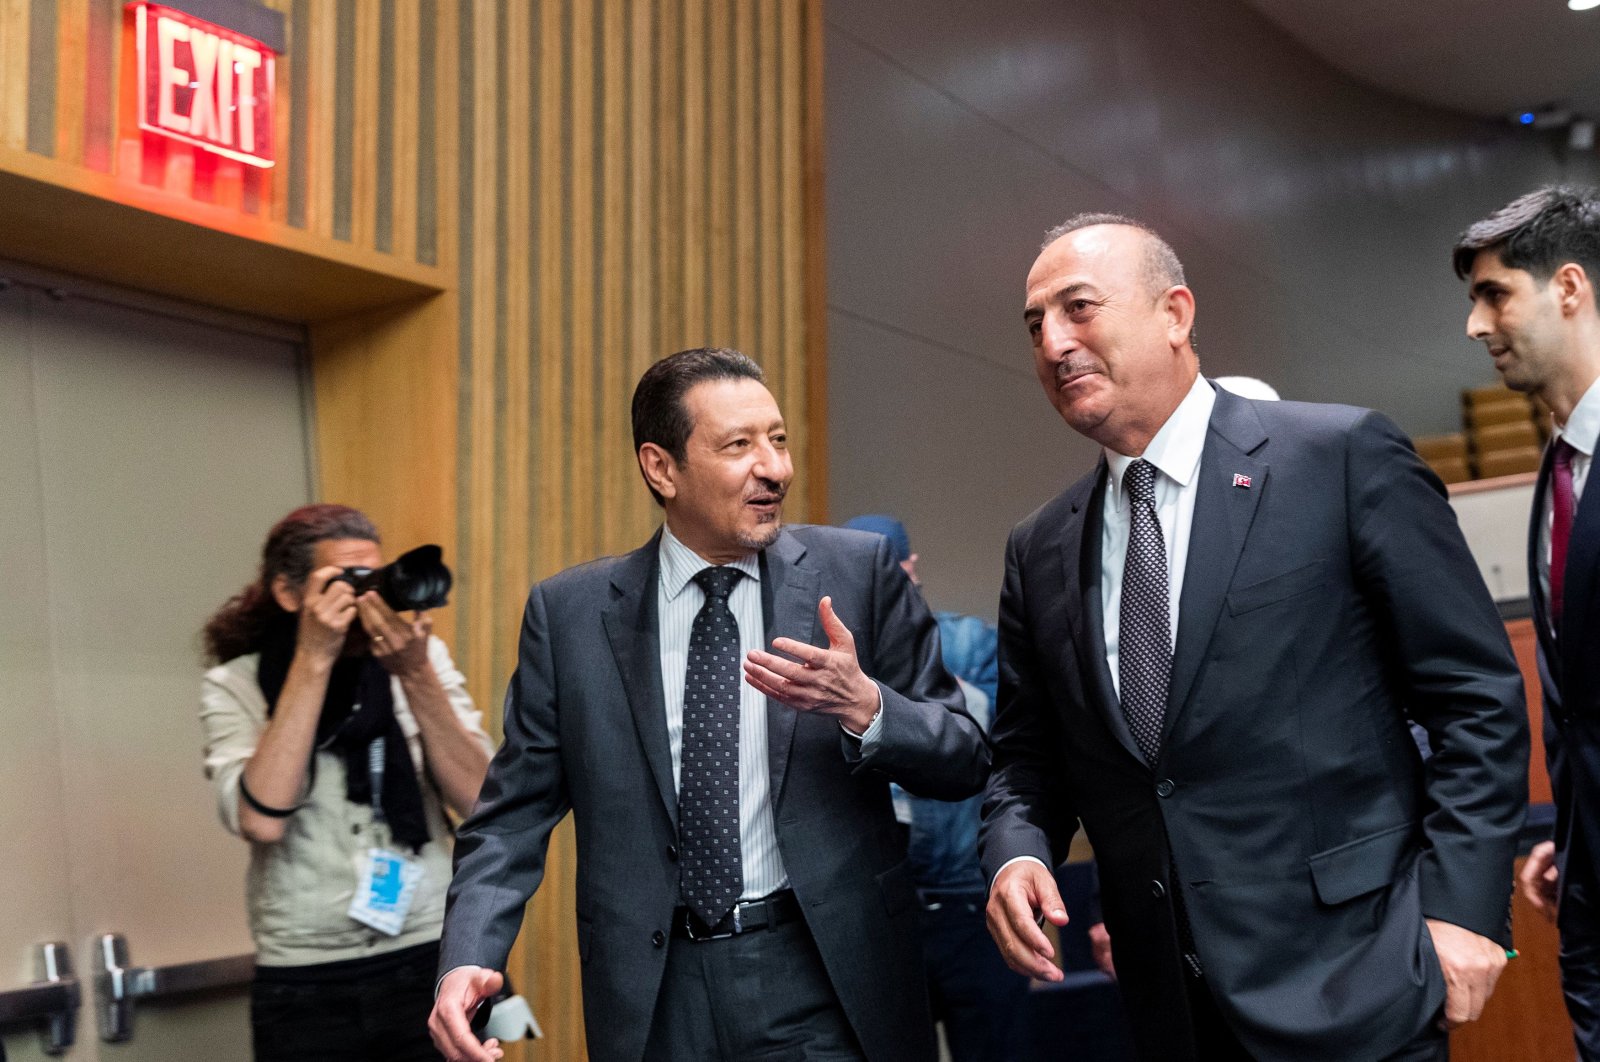 Foreign Minister Mevlüt Çavuşoğlu exits the room after speaking during a "Global Food Security Call to Action" meeting of foreign ministers at United Nations headquarters in New York, U.S., May 18, 2022. (Reuters Photo)